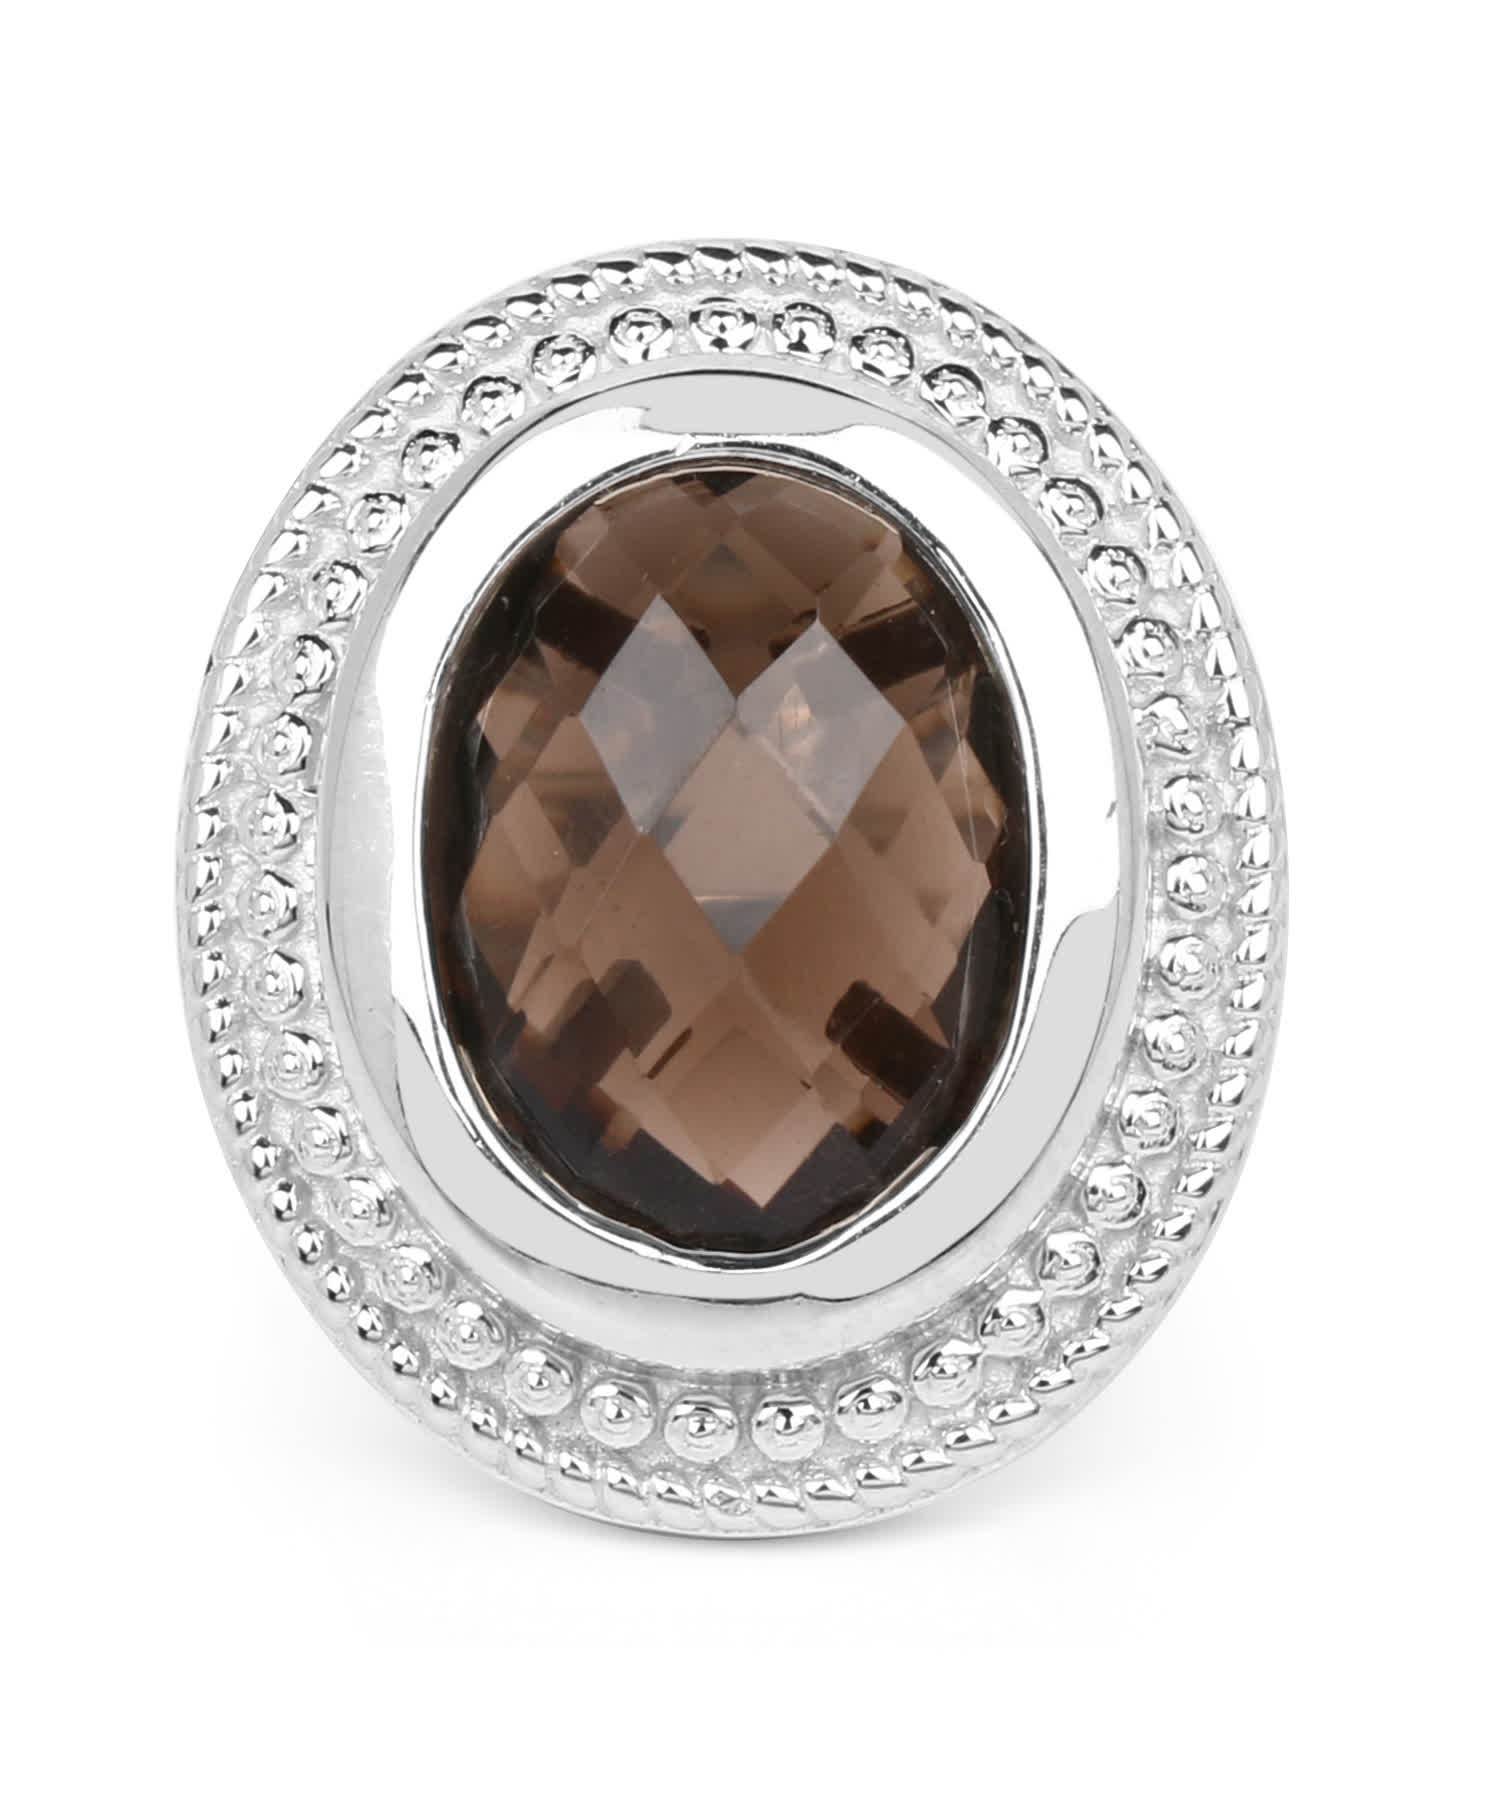 7.90ctw Natural Smoky Quartz Rhodium Plated 925 Sterling Silver Oval Cocktail Ring View 3